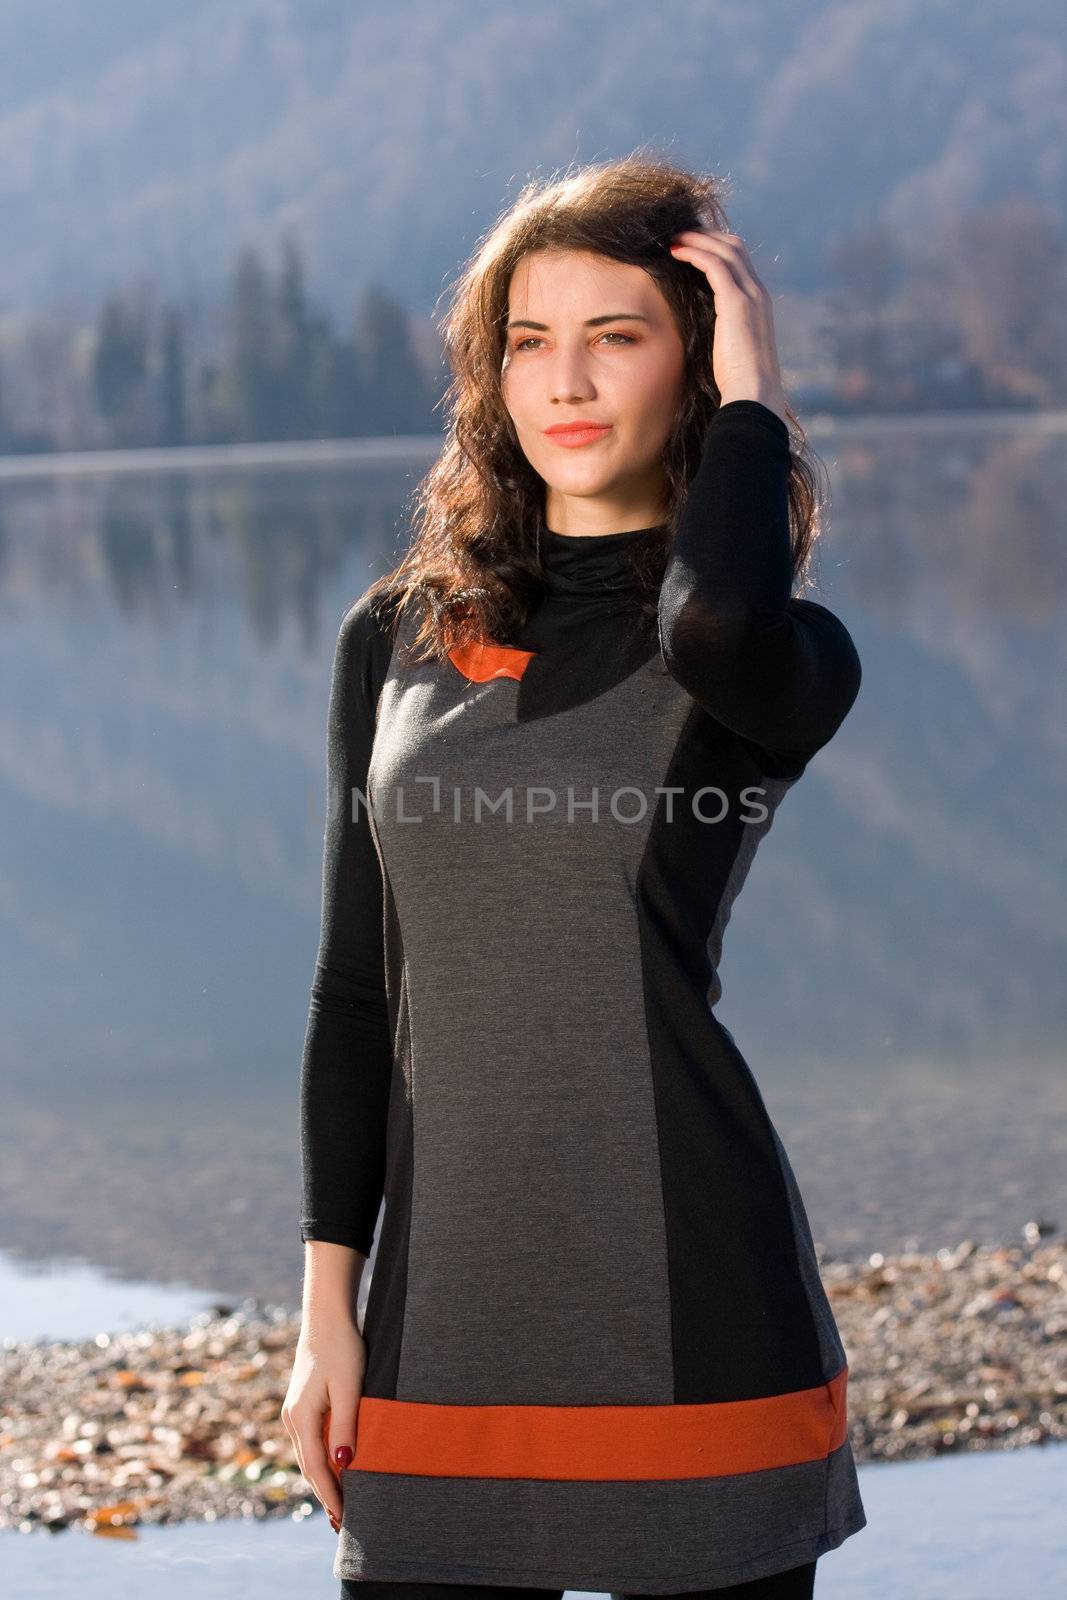 Pensive woman in dress on the lakeshore